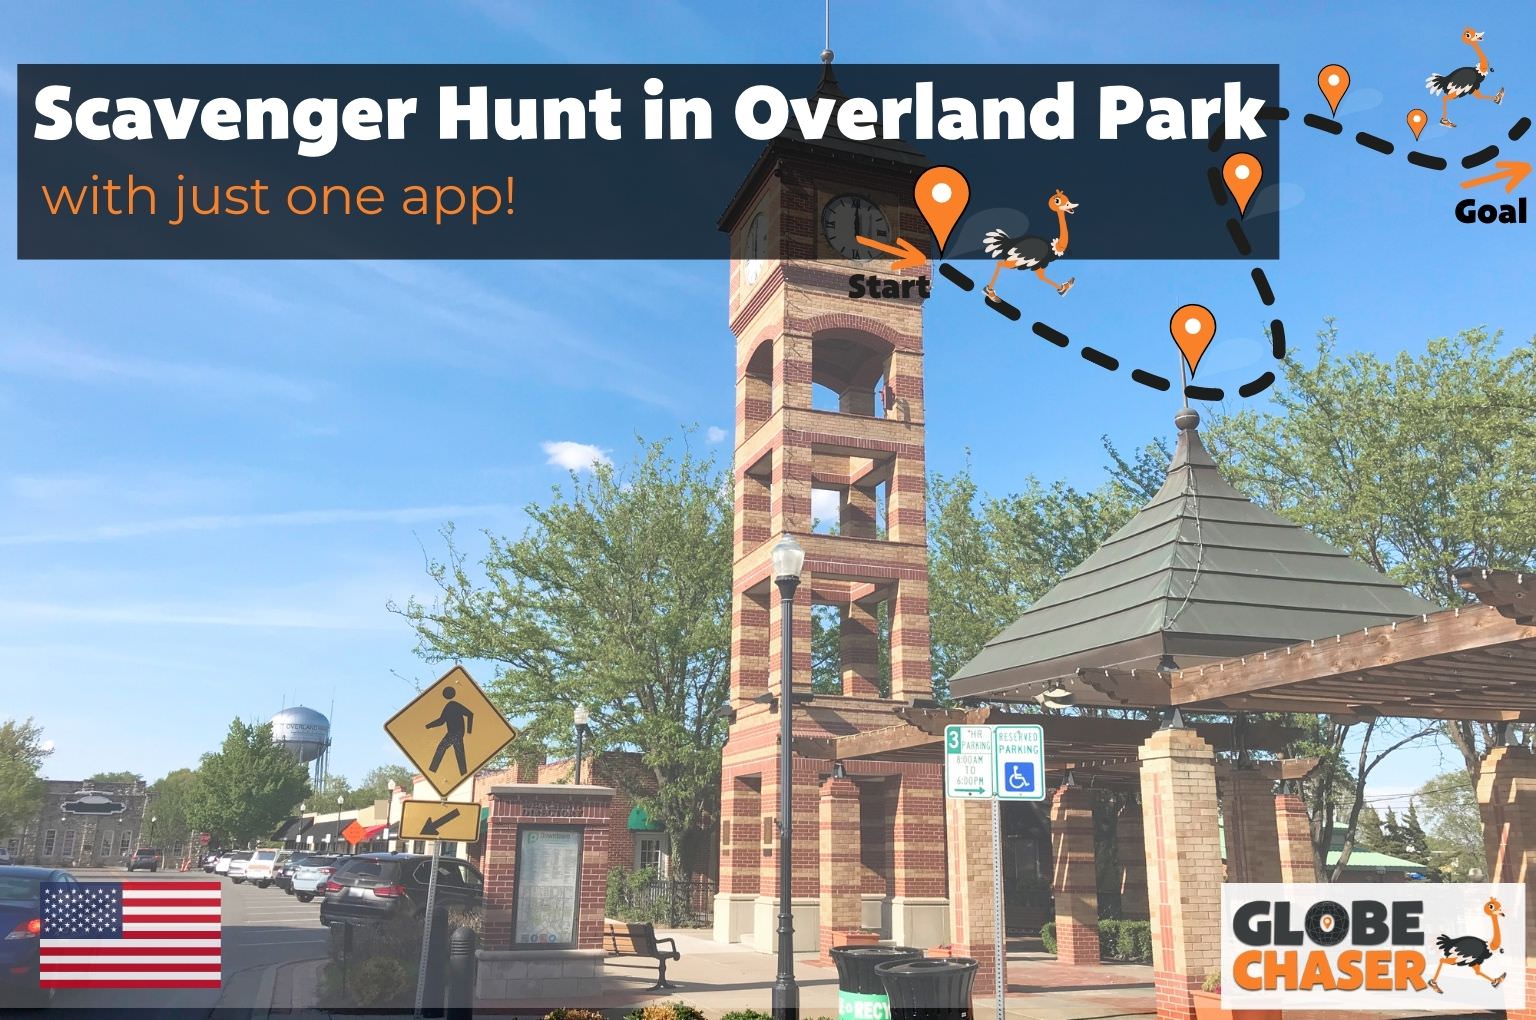 Scavenger Hunt in Overland Park, USA - Family Activities with the Globe Chaser App for Outdoor Fun